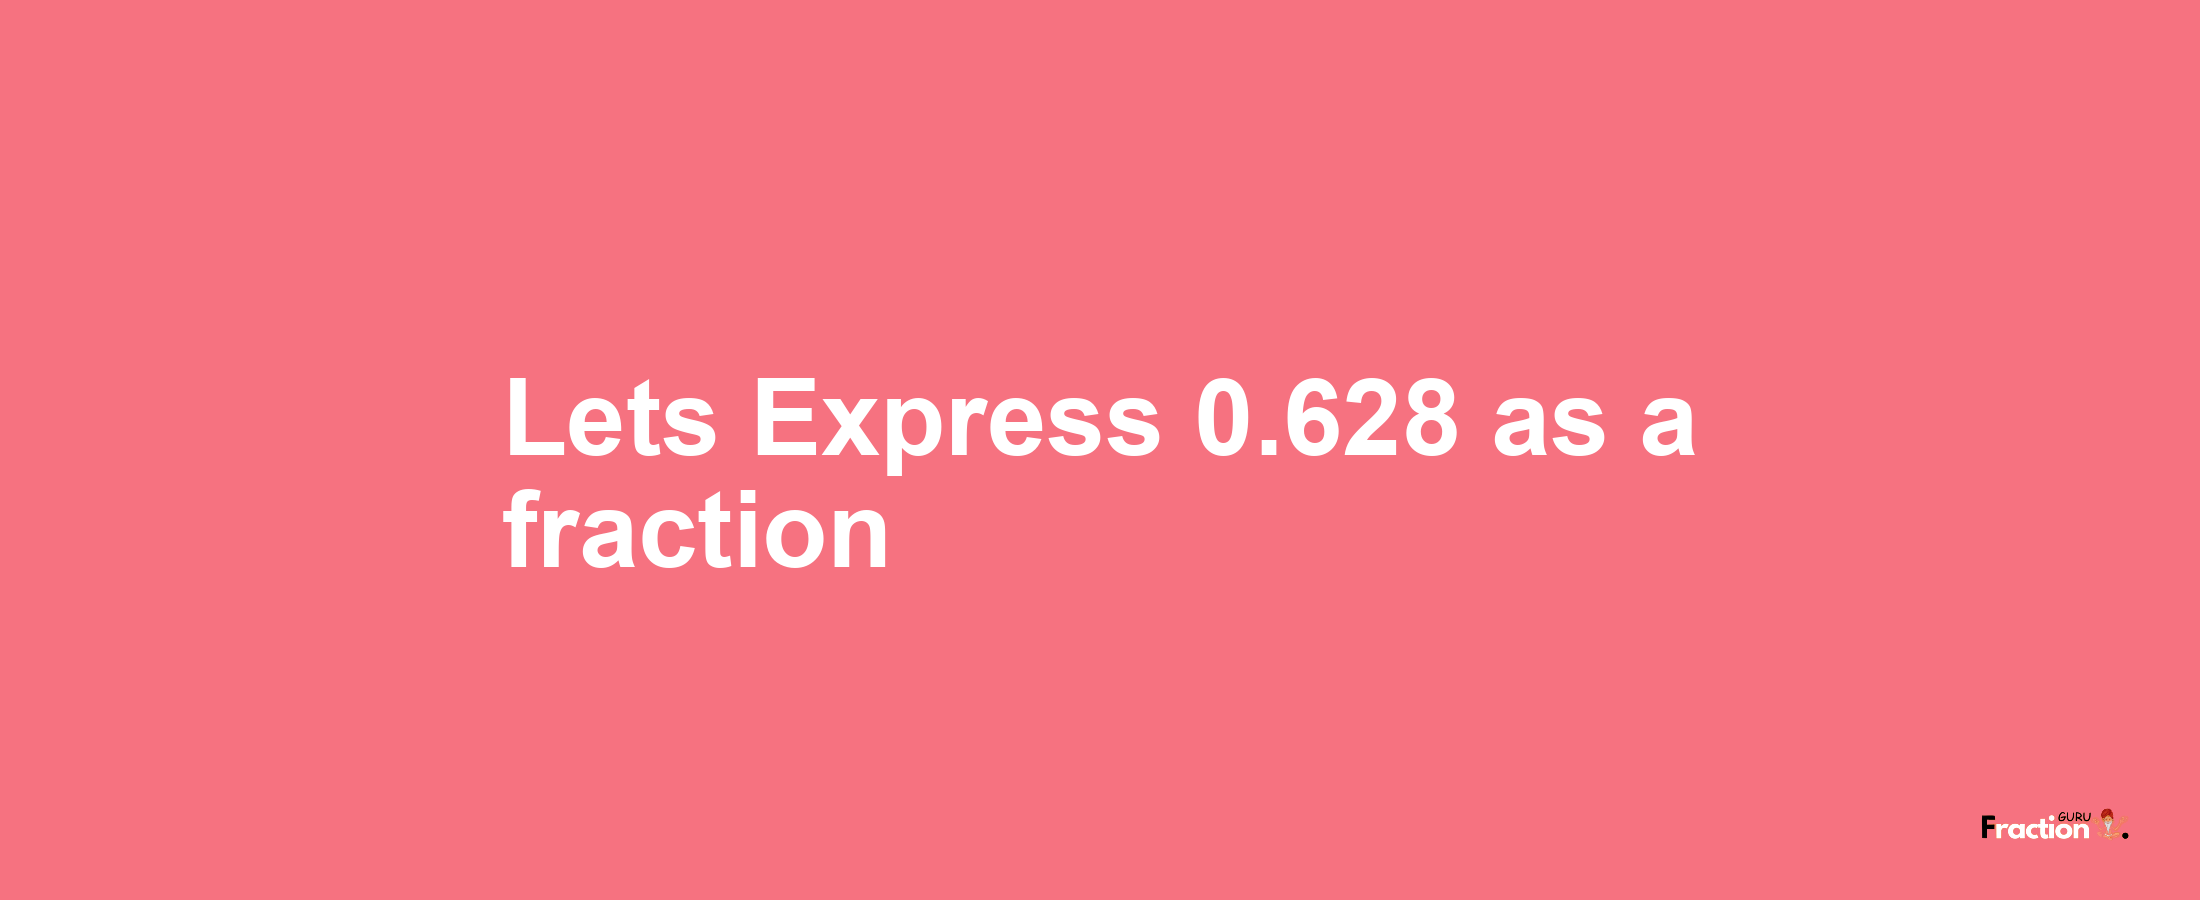 Lets Express 0.628 as afraction